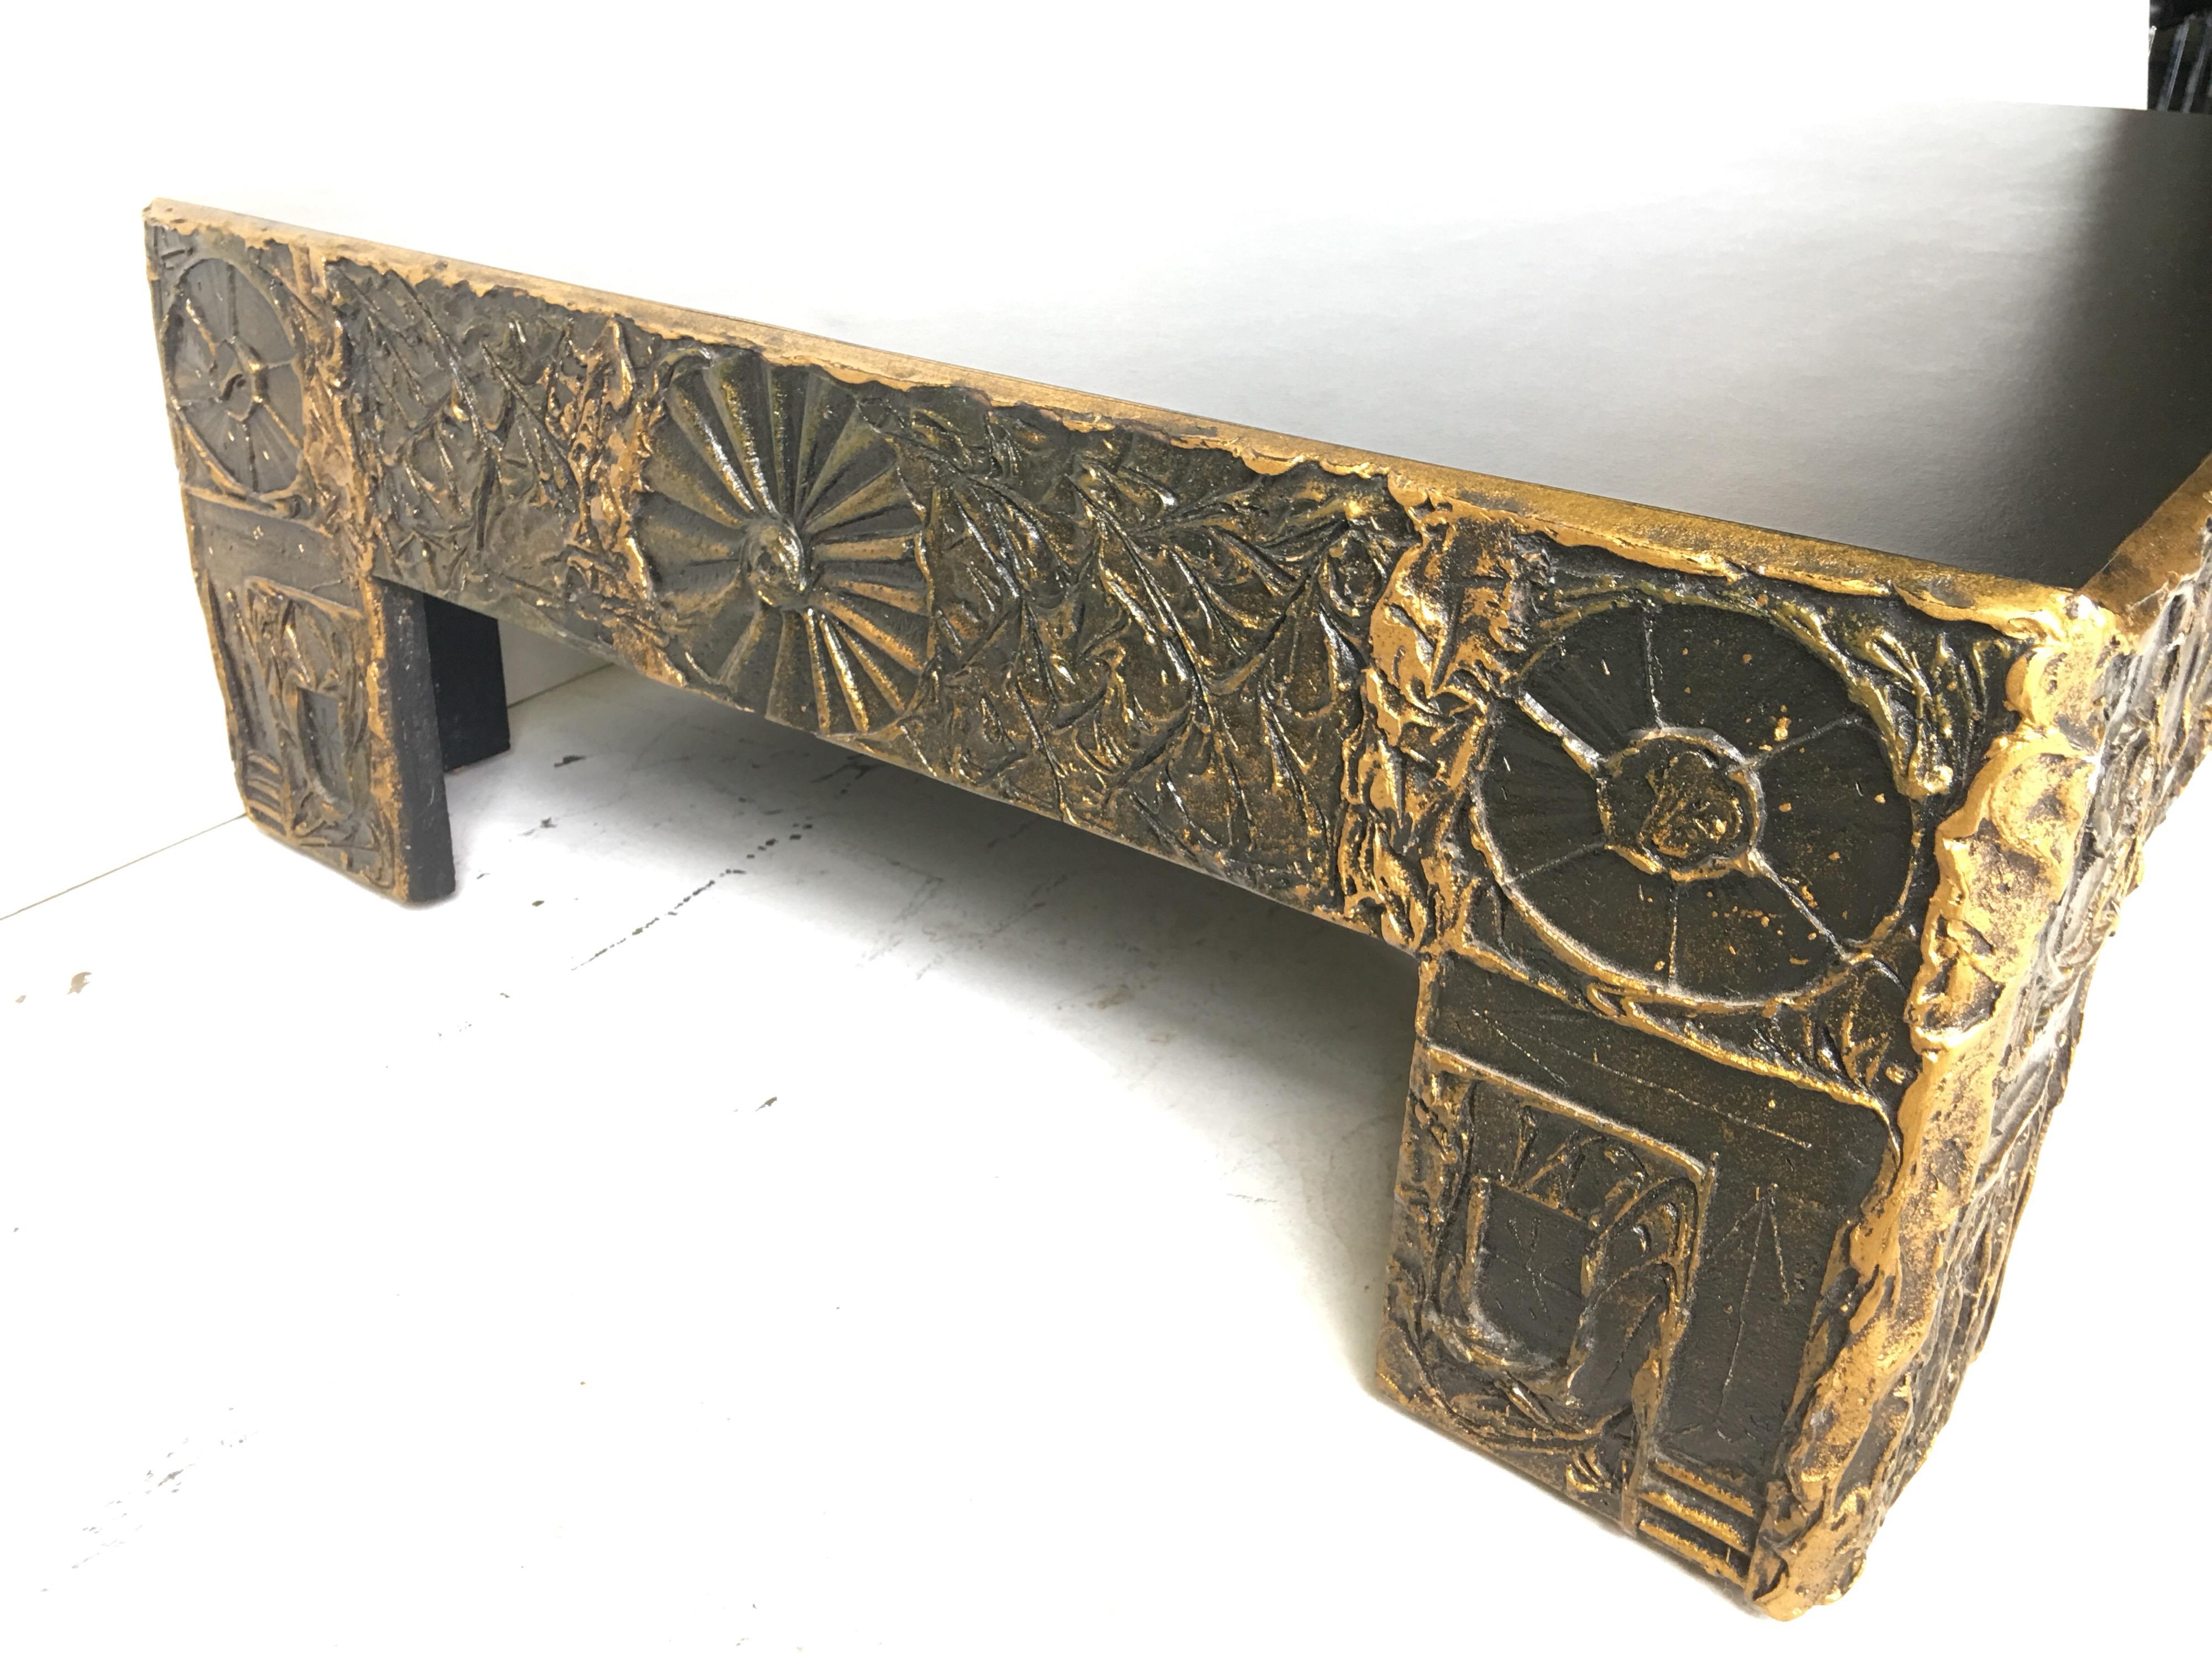 Absolutely fantastic low and large, cocktail table by Adrian Pearsall for Craft Assoc. It is from circa 1970, in beautiful condition. The brutalist sculpted resin sides and legs are in black and gold all orig. from factory.